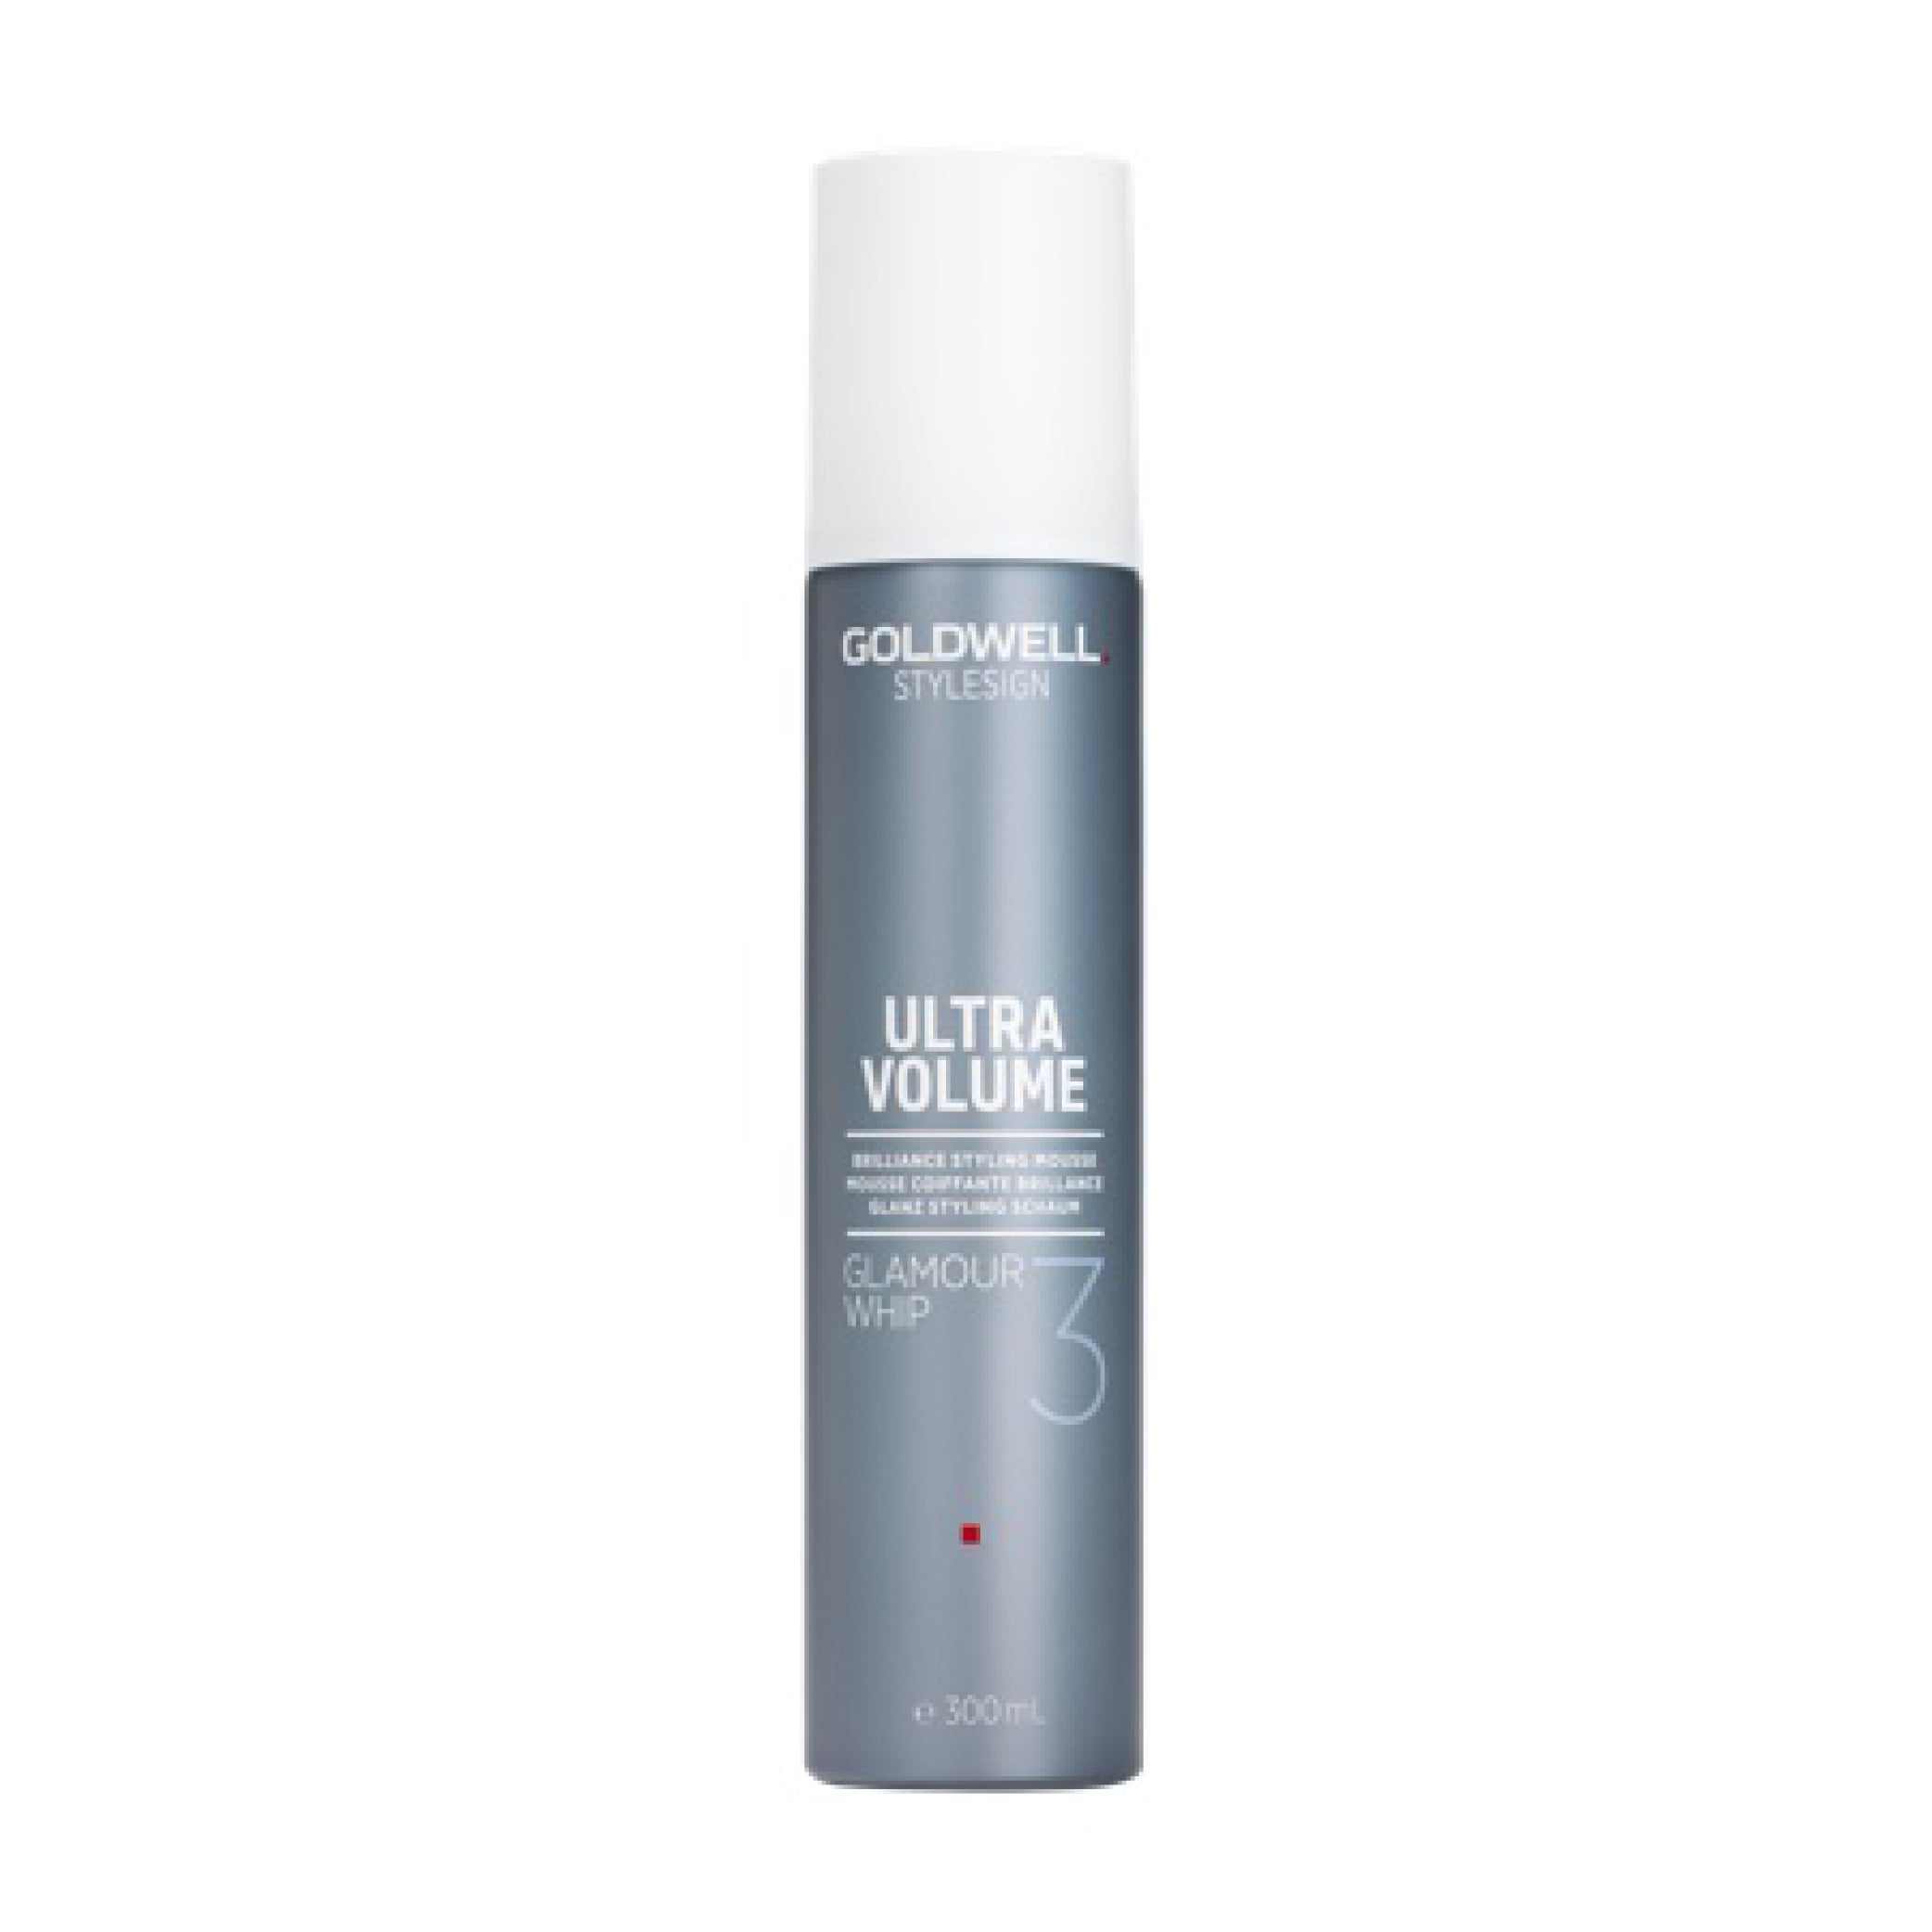 Glamour Whip - Brilliance Styling Mousse